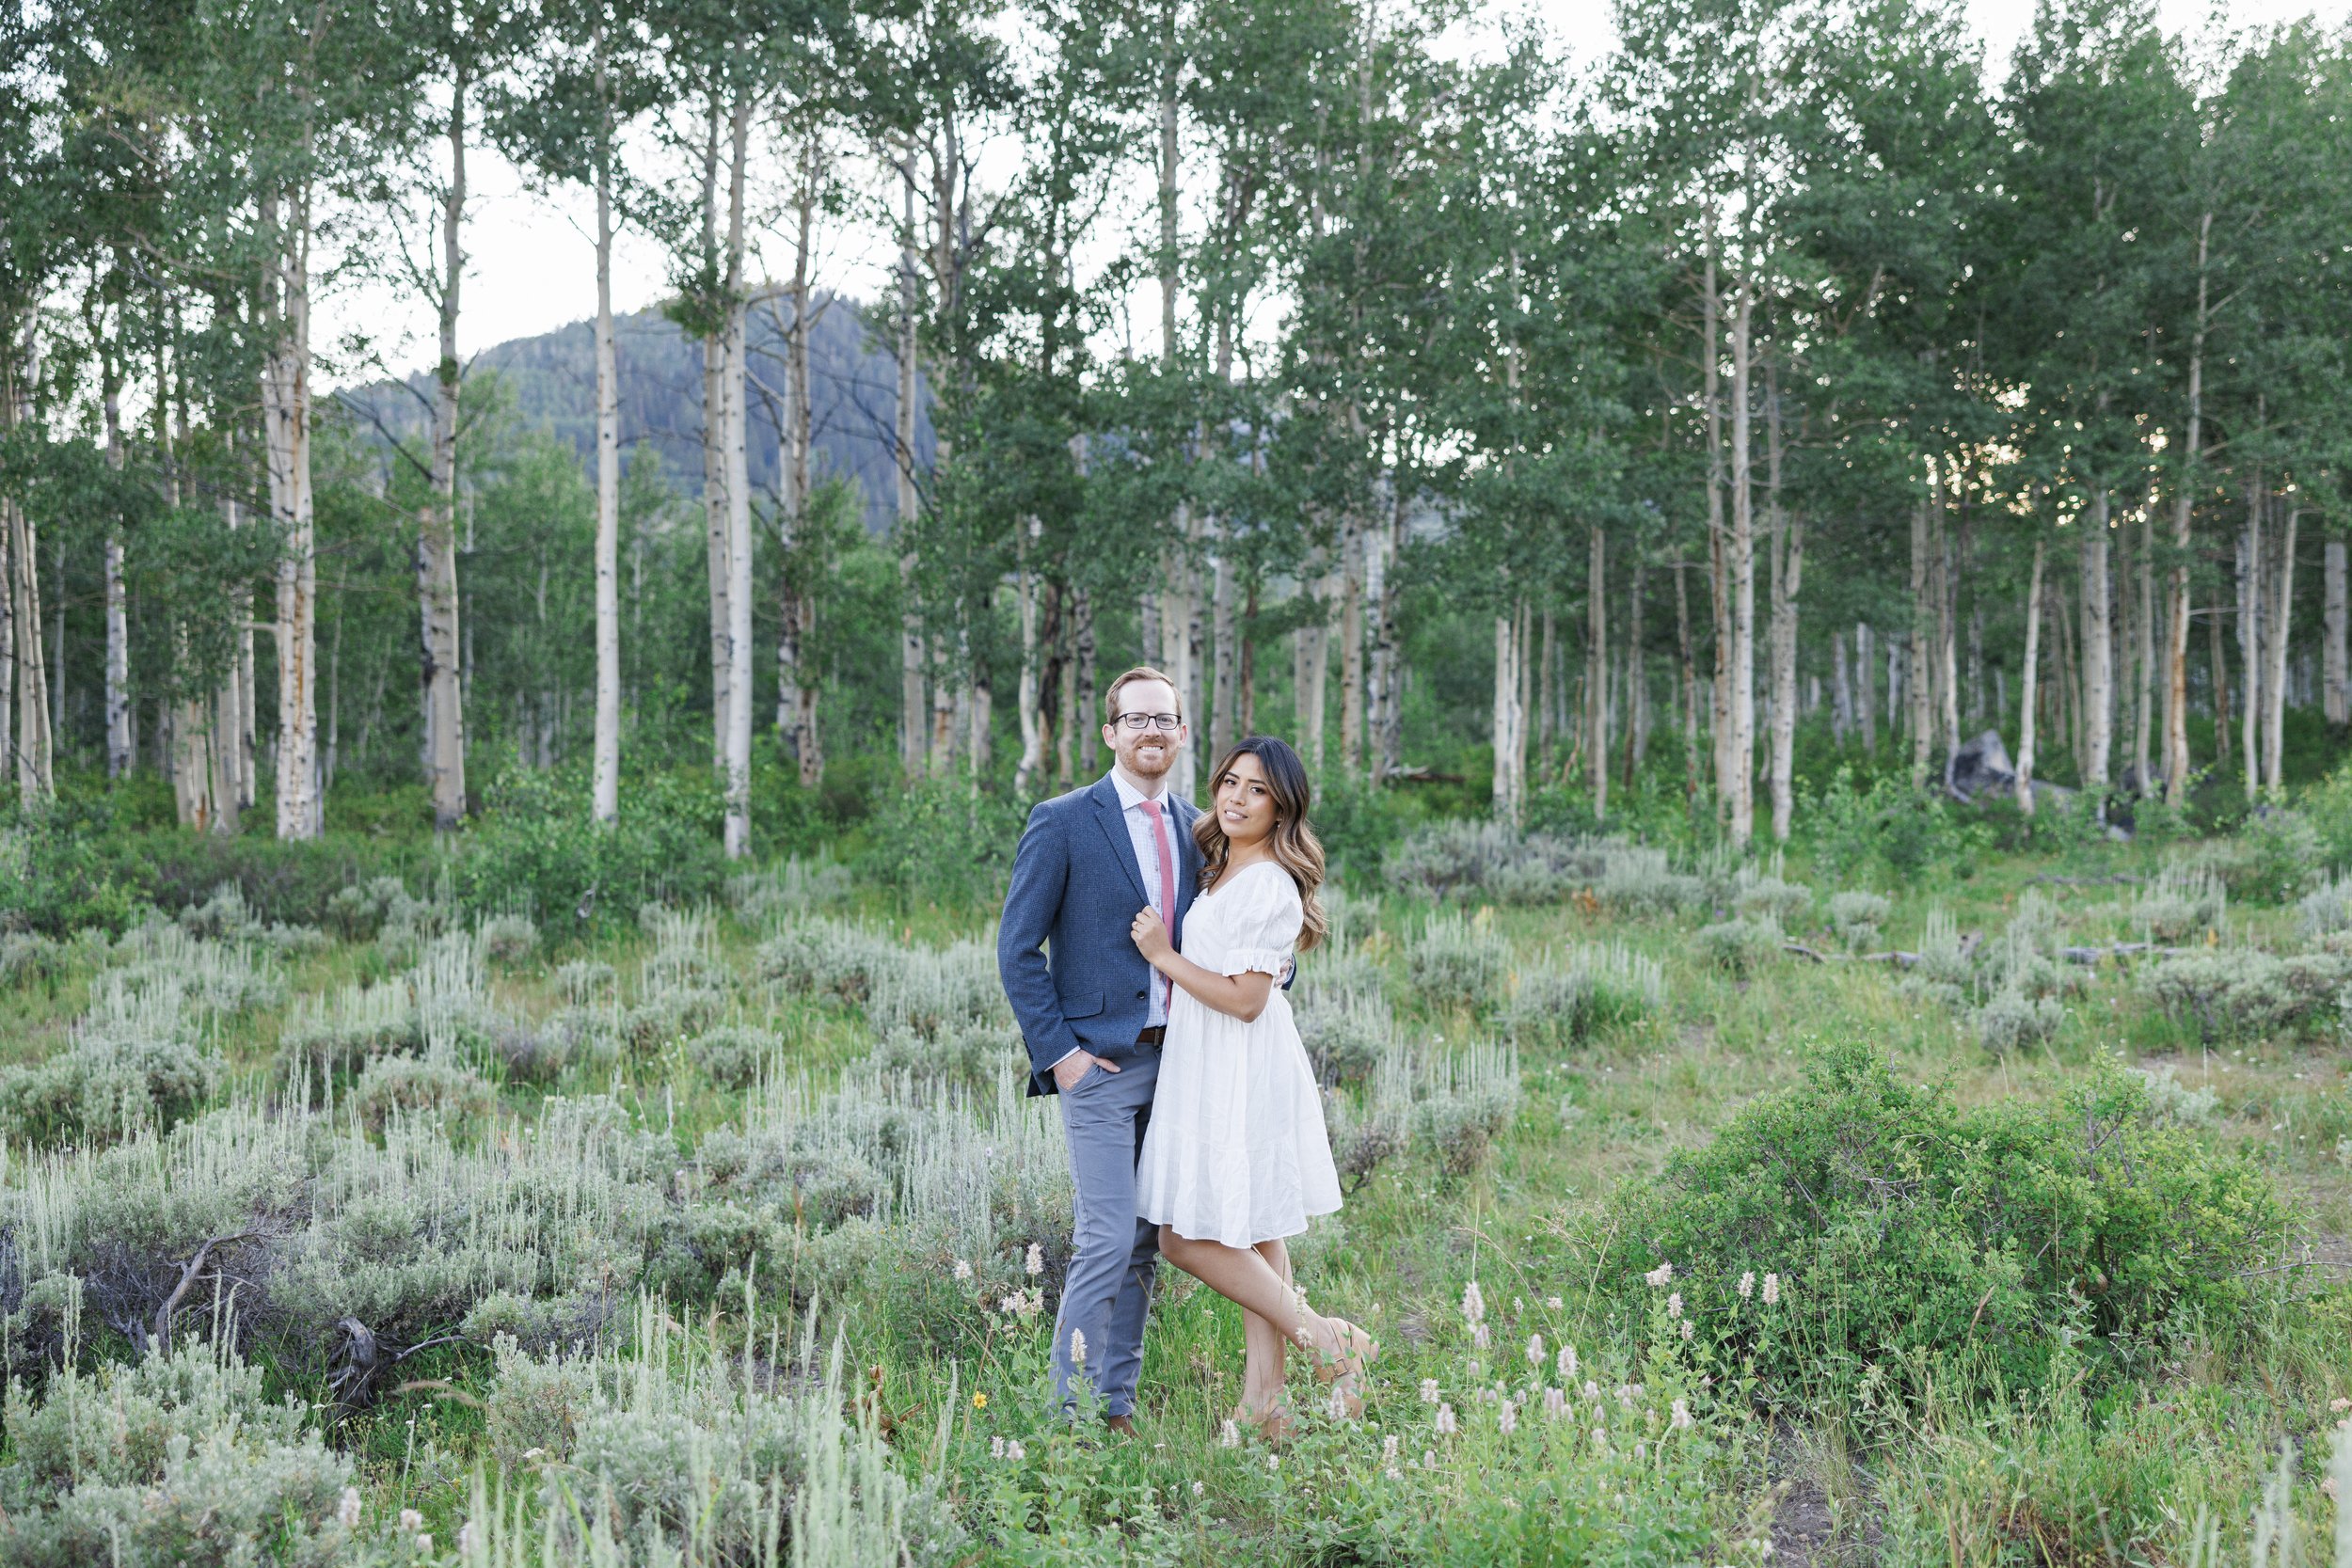  On the Park City mountainside, an engaged couple smile among the sagebrush by Savanna Richardson Photography. green mountain engagement ideas #ParkCityEngagements #ParkCityPhotographers #SavannaRichardsonPhotography #SavannaRichardsonEngagements 